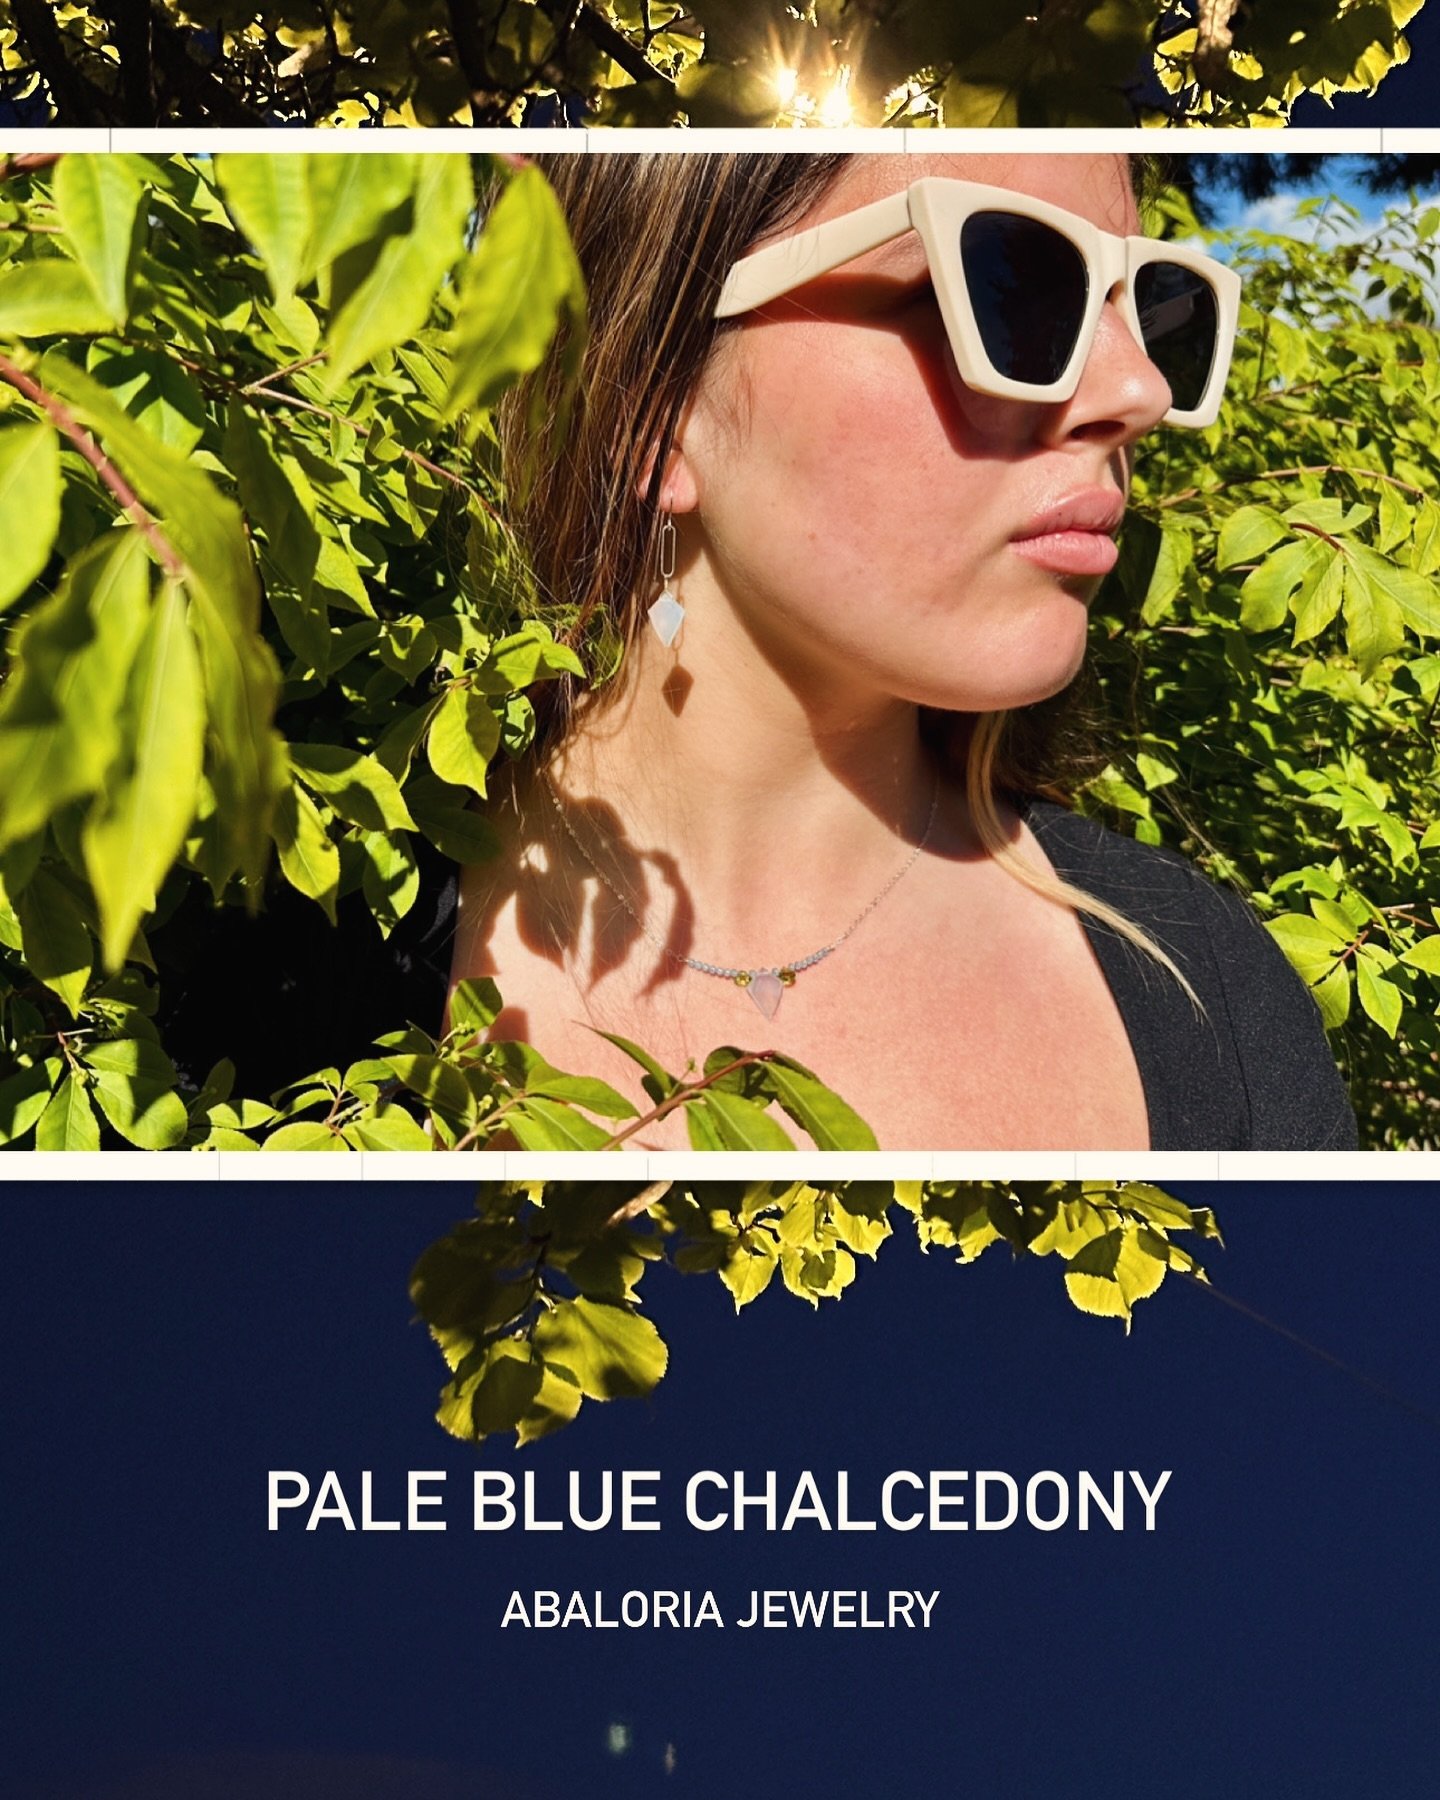 Soft + Muted + Stunning!

Blue chalcedony is a semi precious stone that comes in many colors, some of the brightest stones I use are from this family, many are colored to get the exuberant look.

Have you heard of this stone? 

Do you own jewelry mad